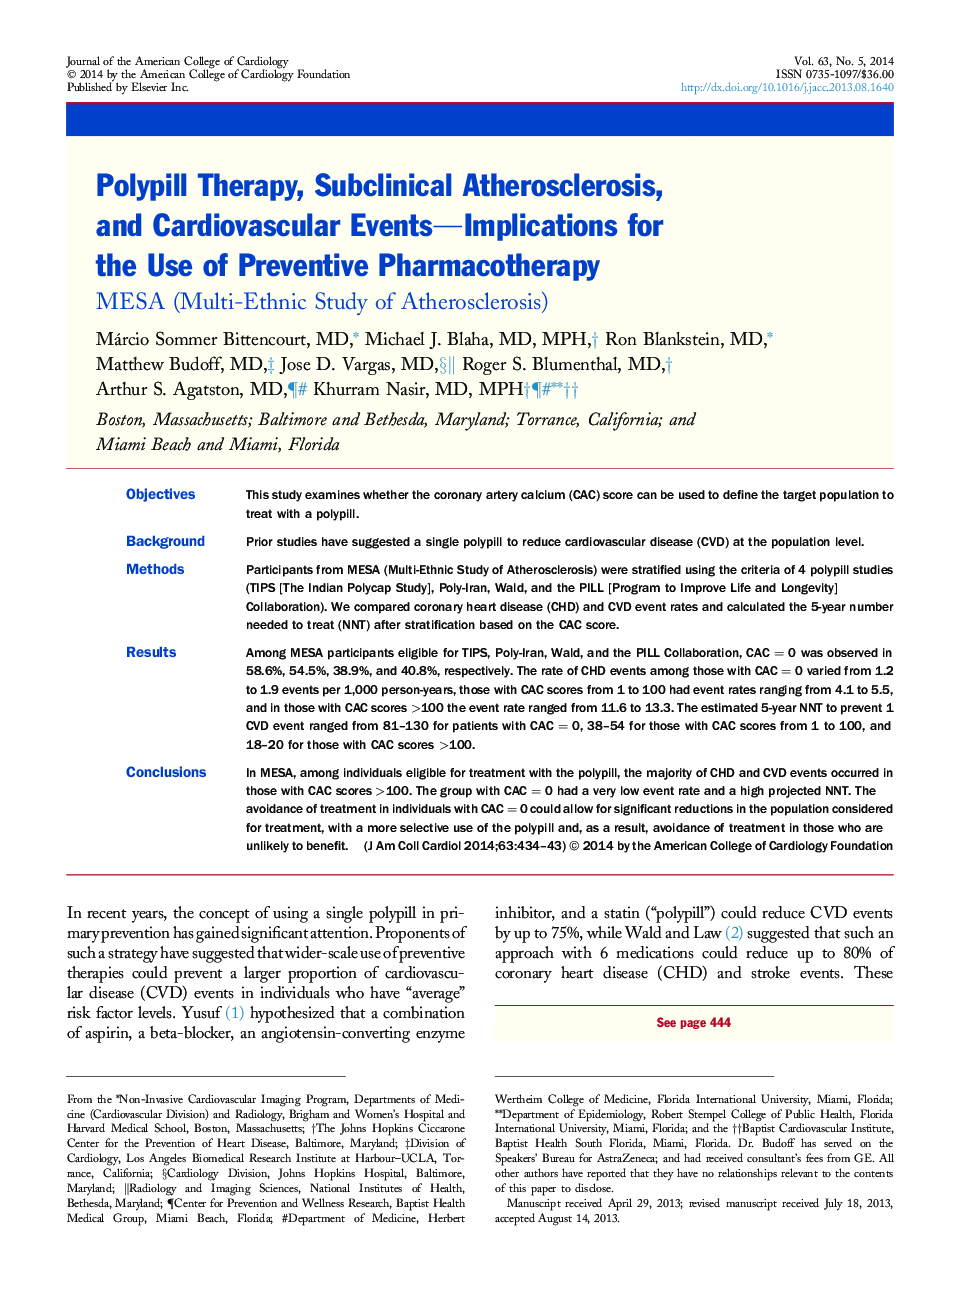 Polypill Therapy, Subclinical Atherosclerosis, and Cardiovascular Events—Implications for the Use of Preventive Pharmacotherapy : MESA (Multi-Ethnic Study of Atherosclerosis)